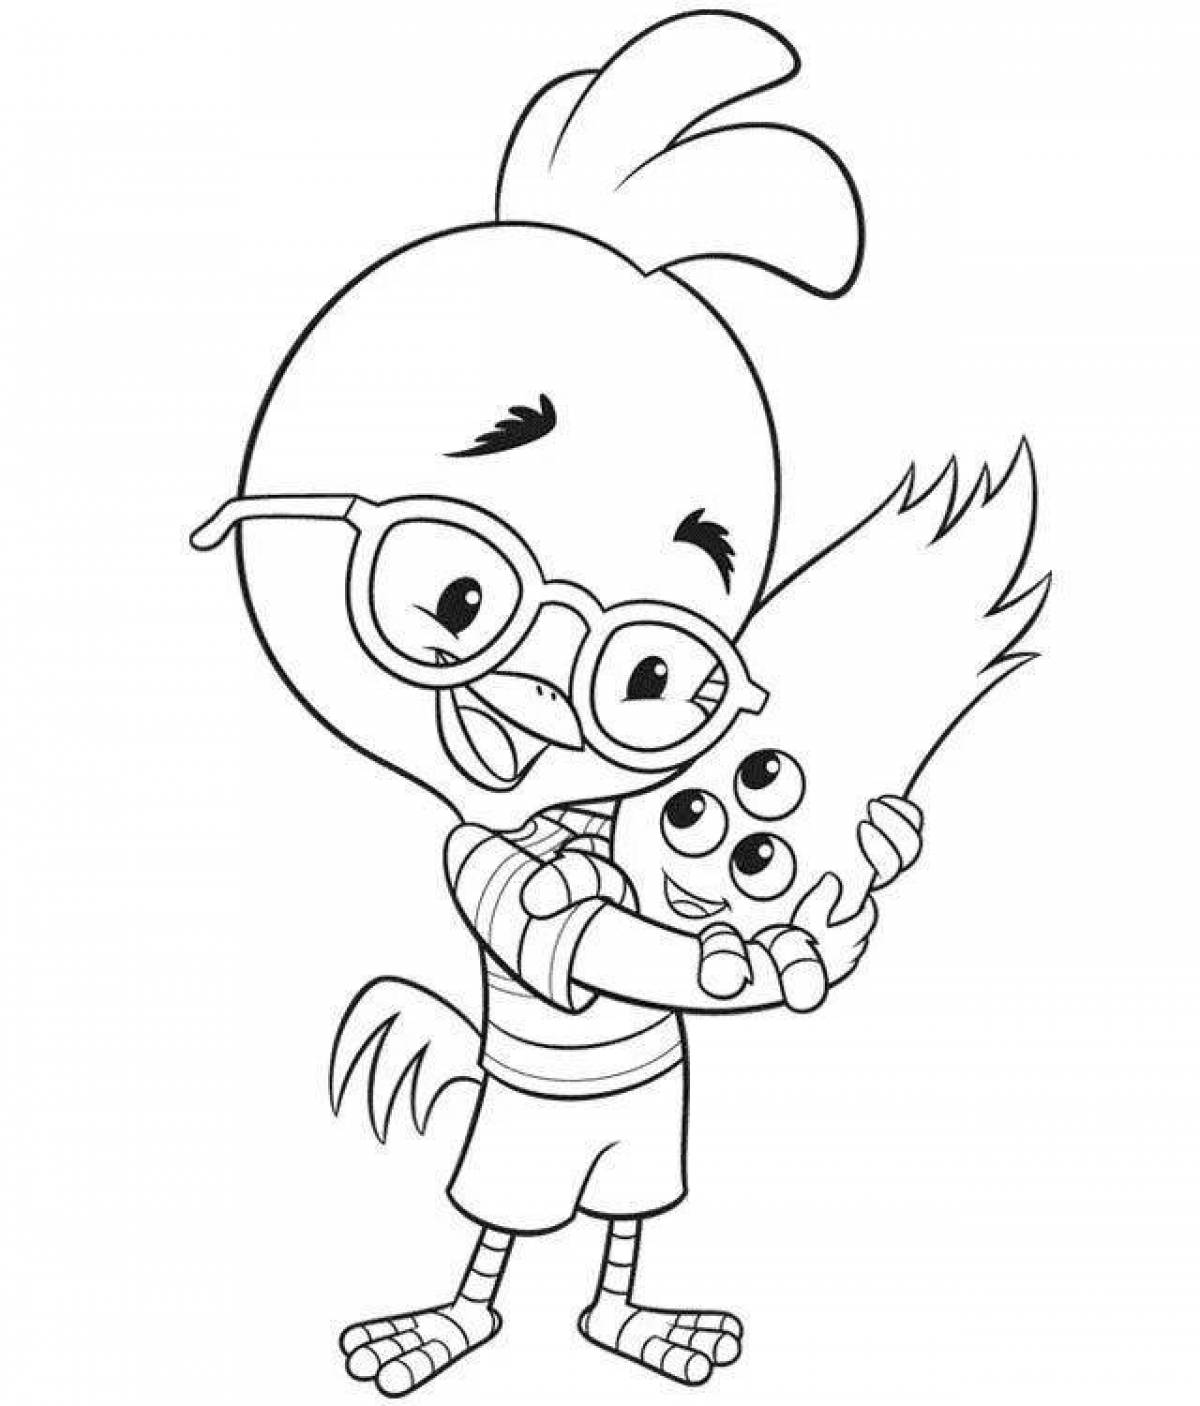 Coloring page playful chick